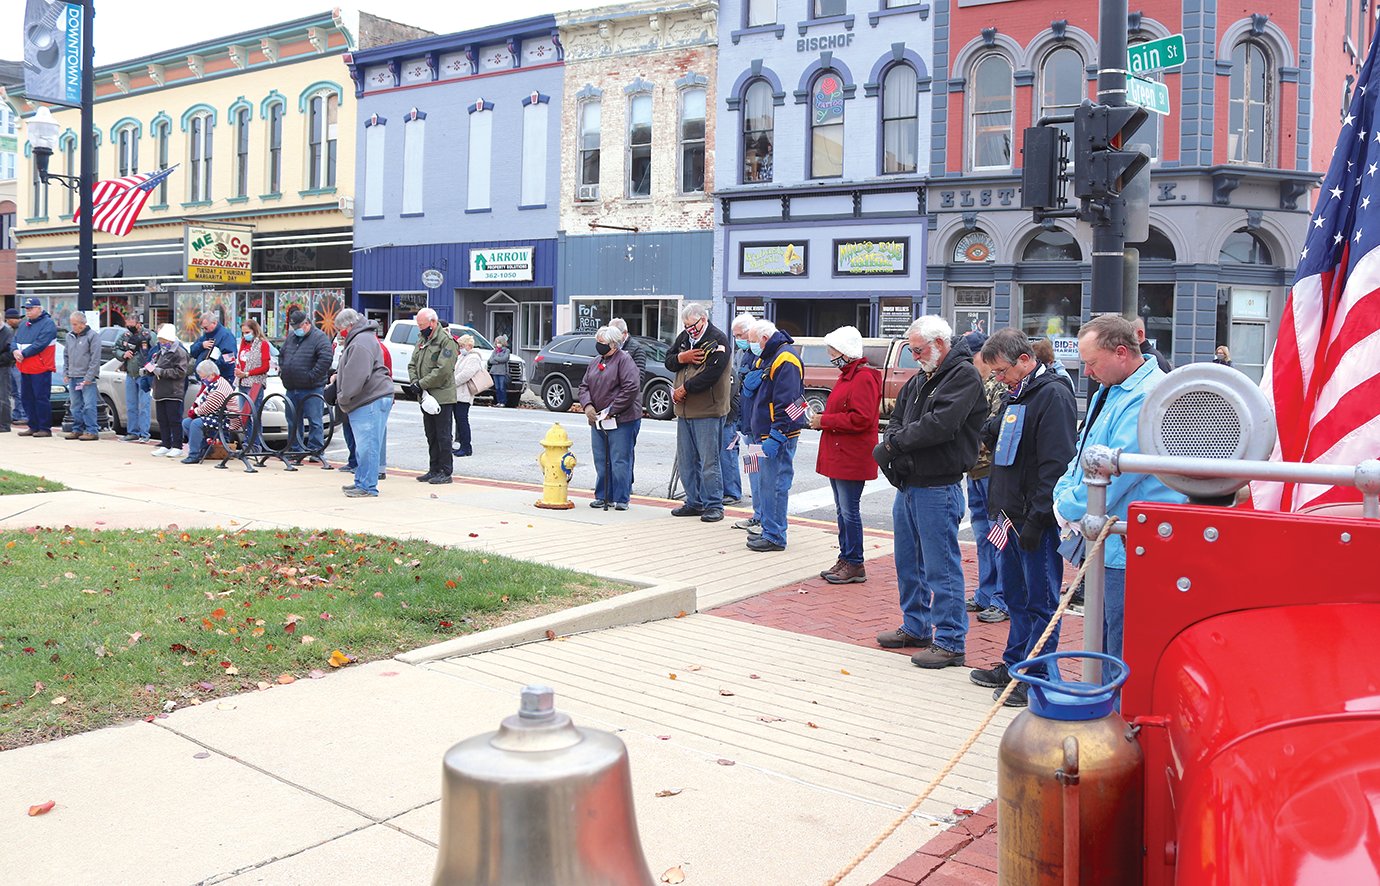 The intersection of Main and Green streets is lined with residents eager to show their appreciation for the country's fallen soldiers Wednesday at Canine Plaza during the annual Veterans Day ceremony.